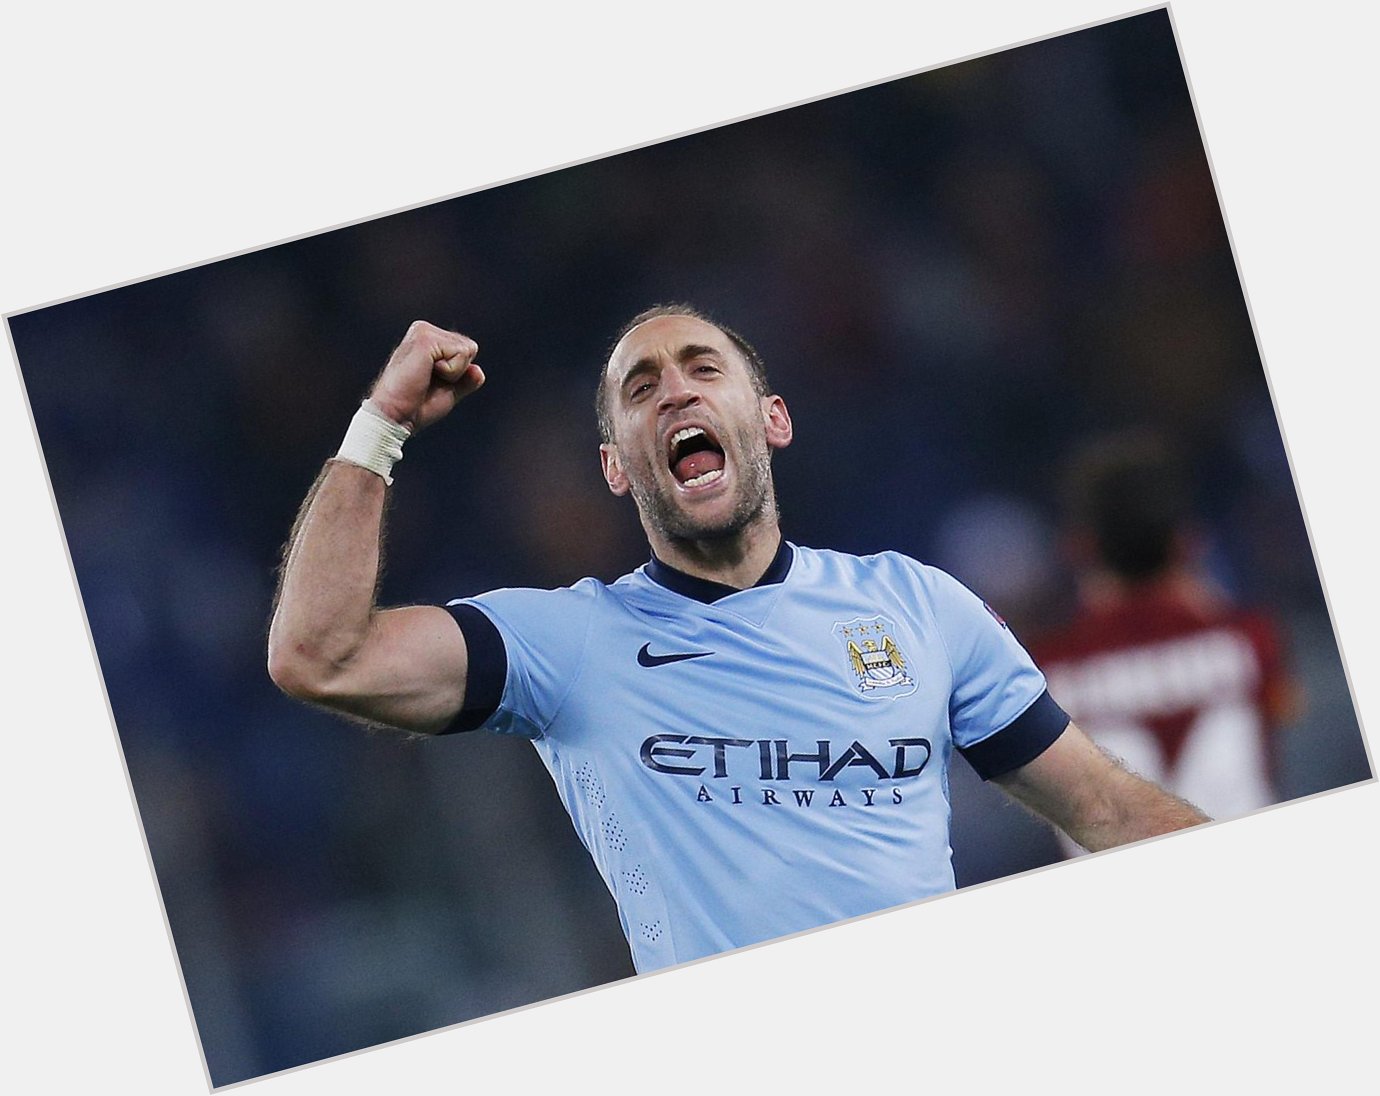 Happy 30th birthday to Man City full-back Pablo Zabaleta. He\s won 2 Premier League titles & 1 FA Cup with the club. 